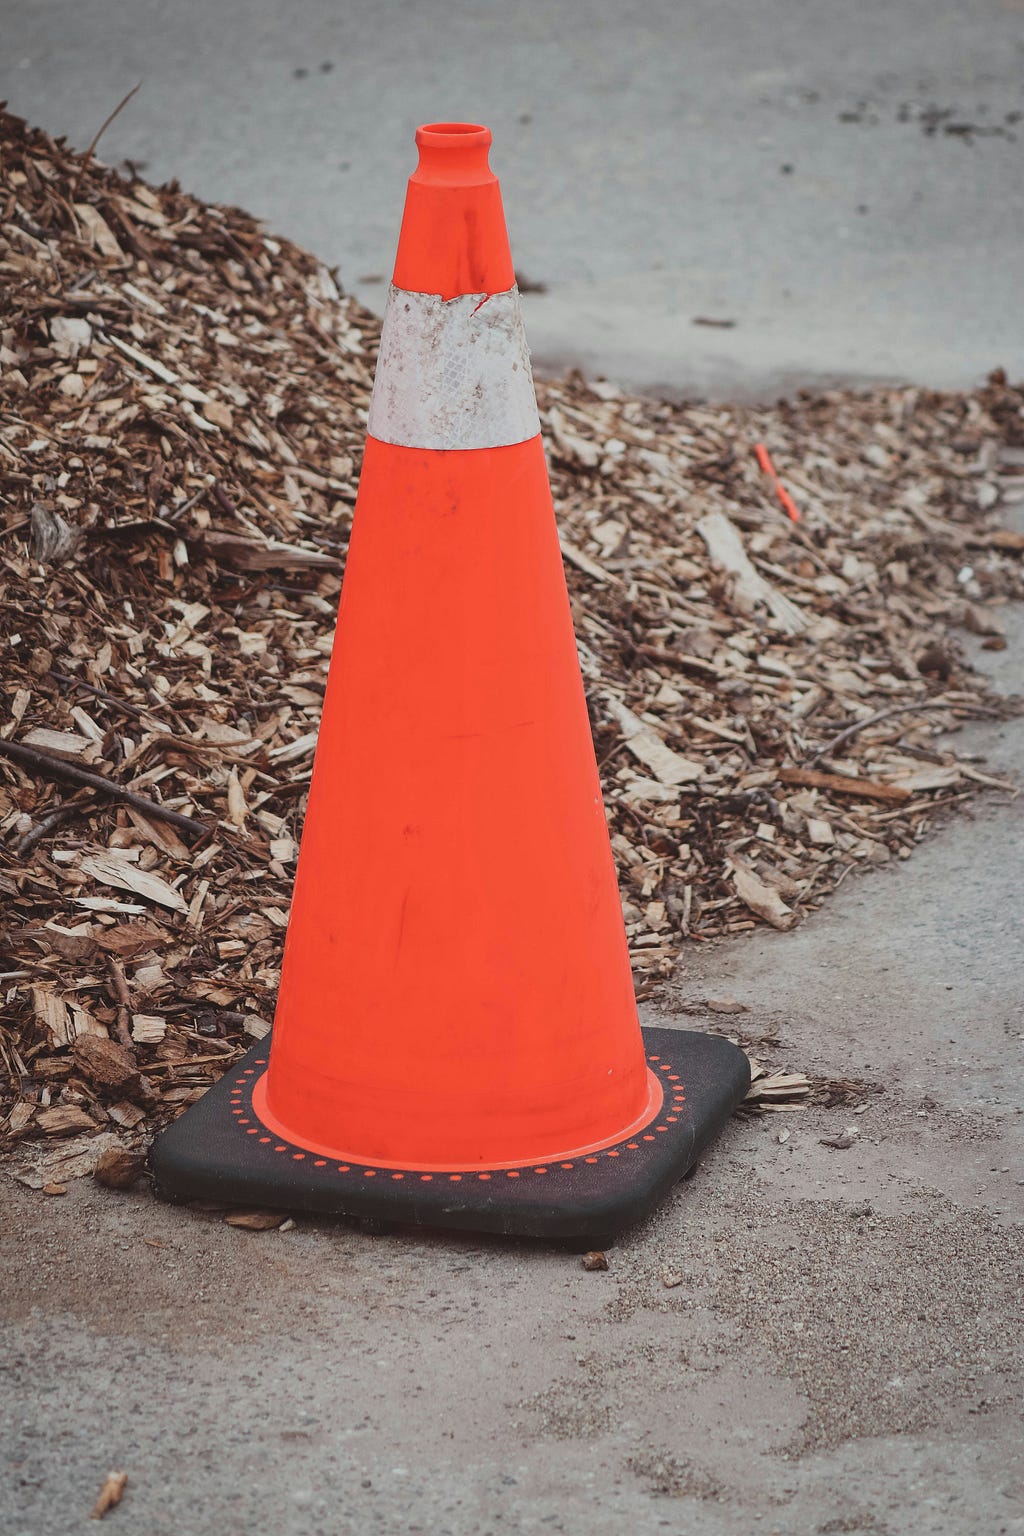 cone and also a traffic sign